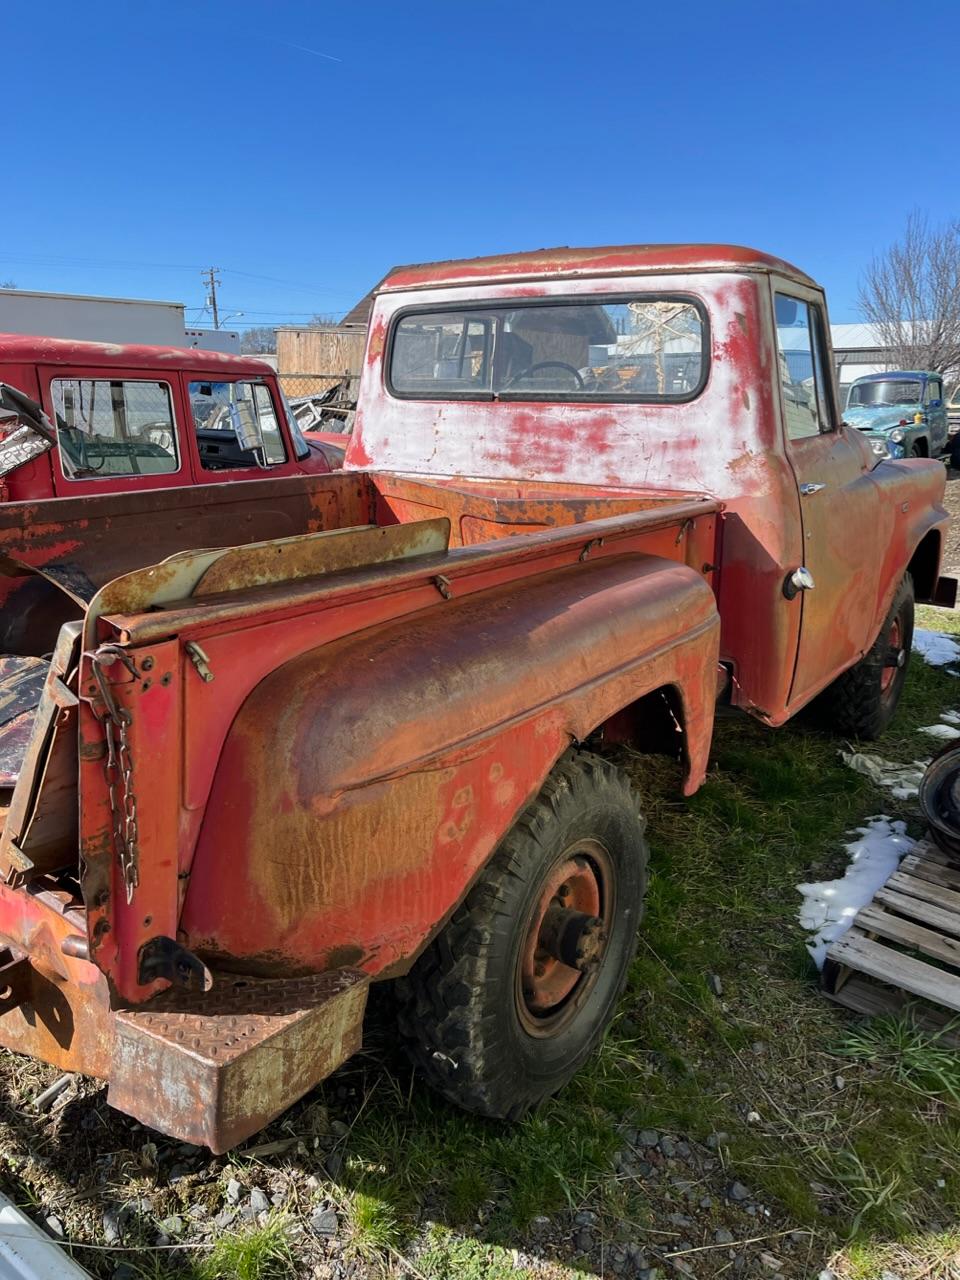 1961 International Truck sells with title